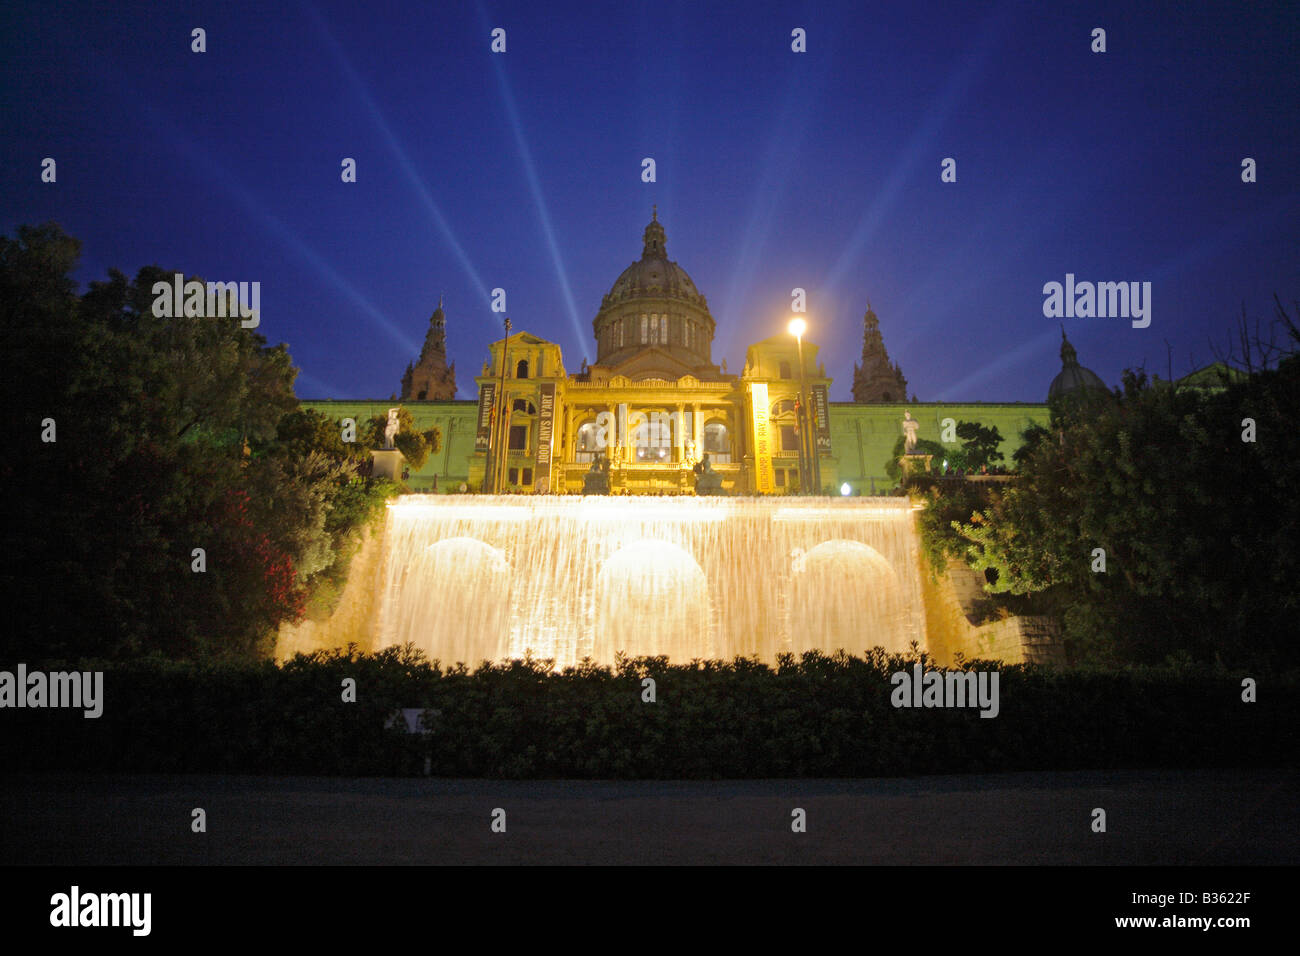 The National Art Museum of Catalonia in Barcelona Spain illuminated at night during the Fiesta de Montjuic Stock Photo